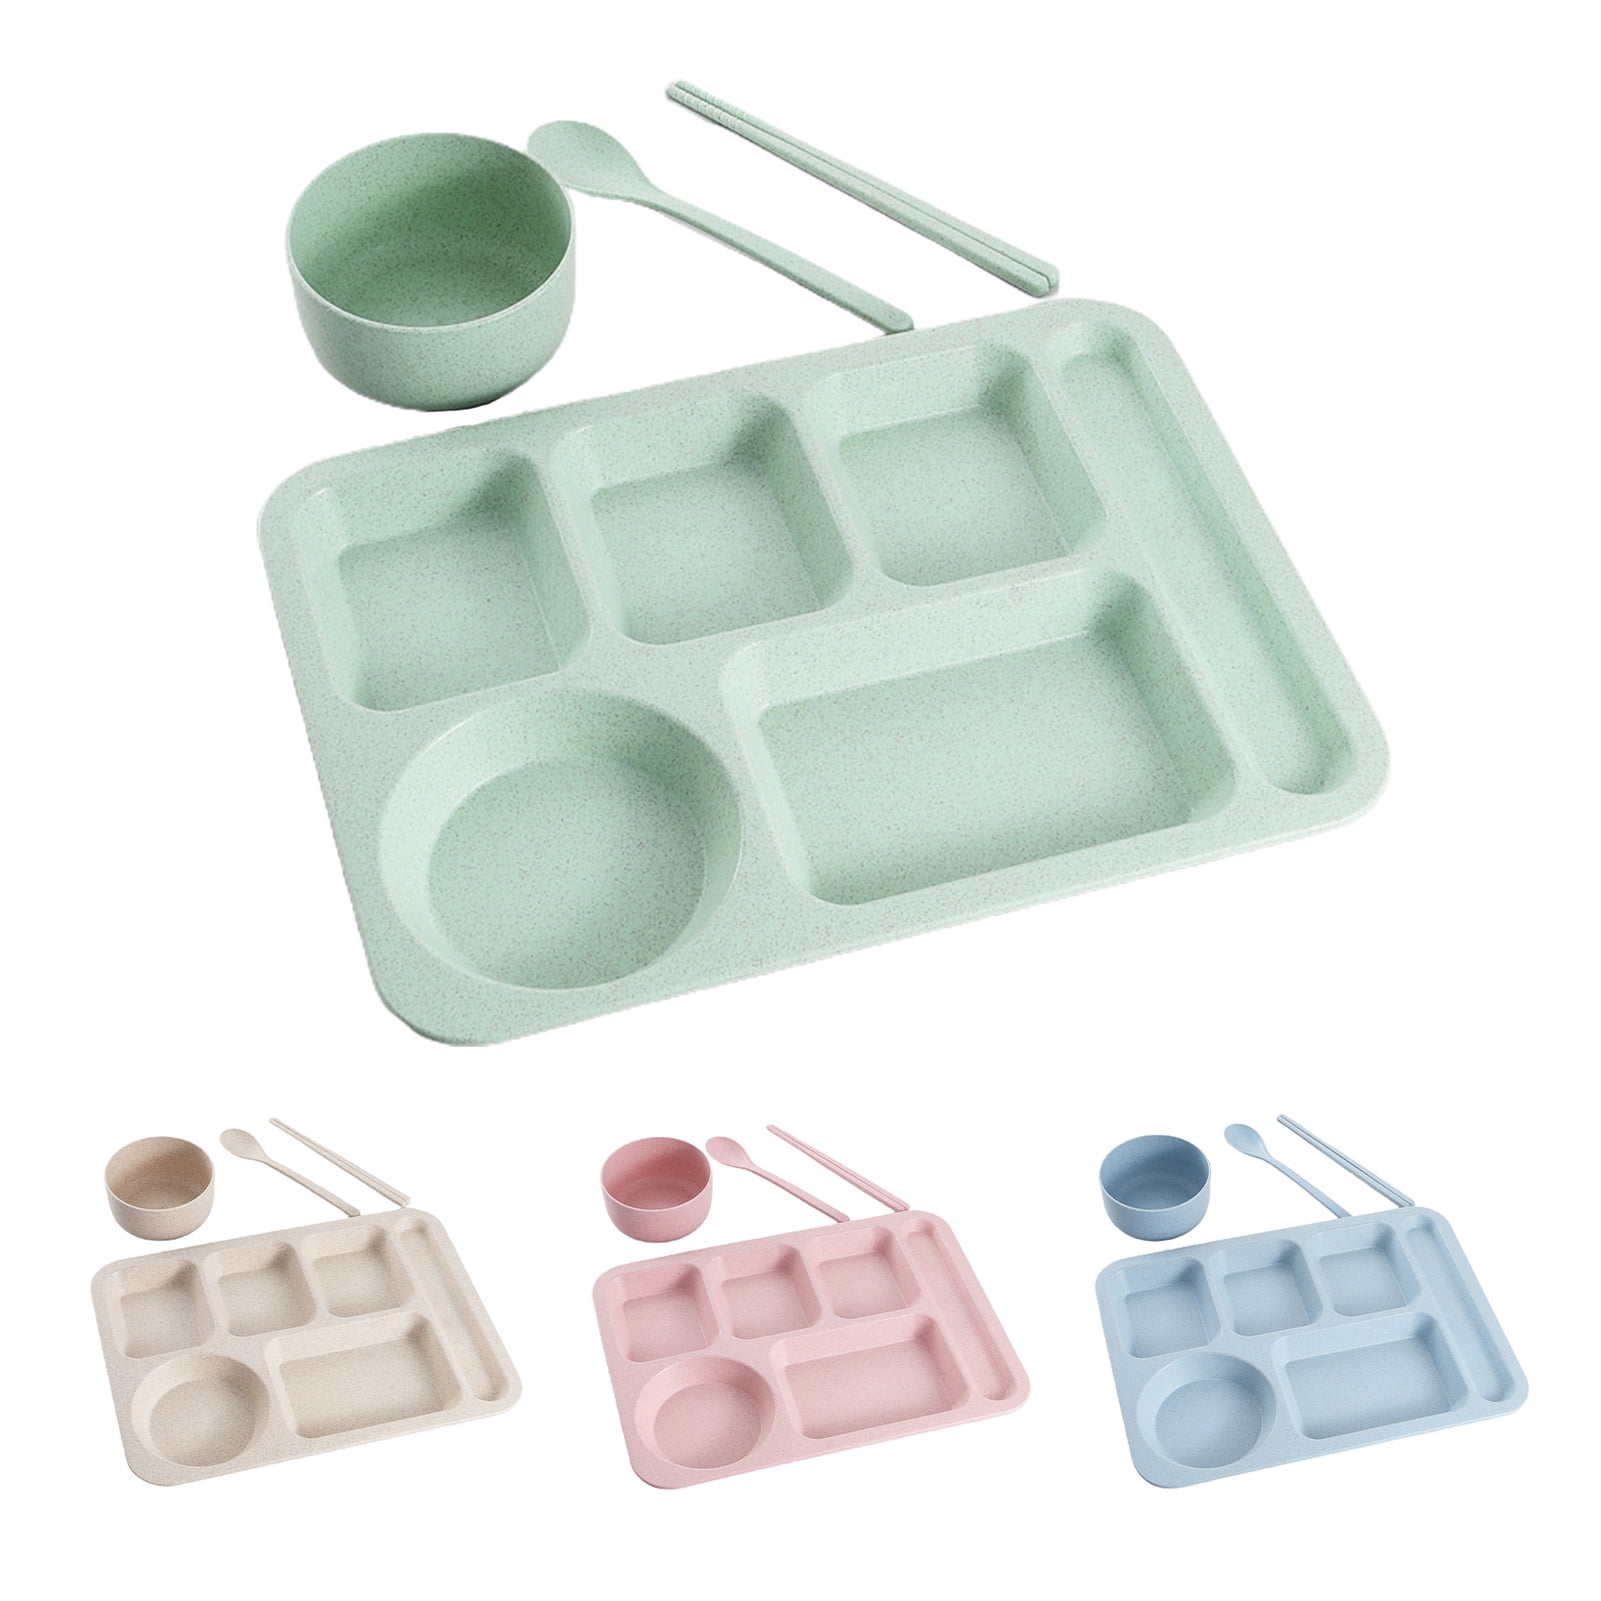 1PC Unbreakable Divided Plates, 3-Compartment Wheat Straw Tray Lunch Trays  Section Plates for Toddlers kids Children Adults, Microwave Dishwasher Safe